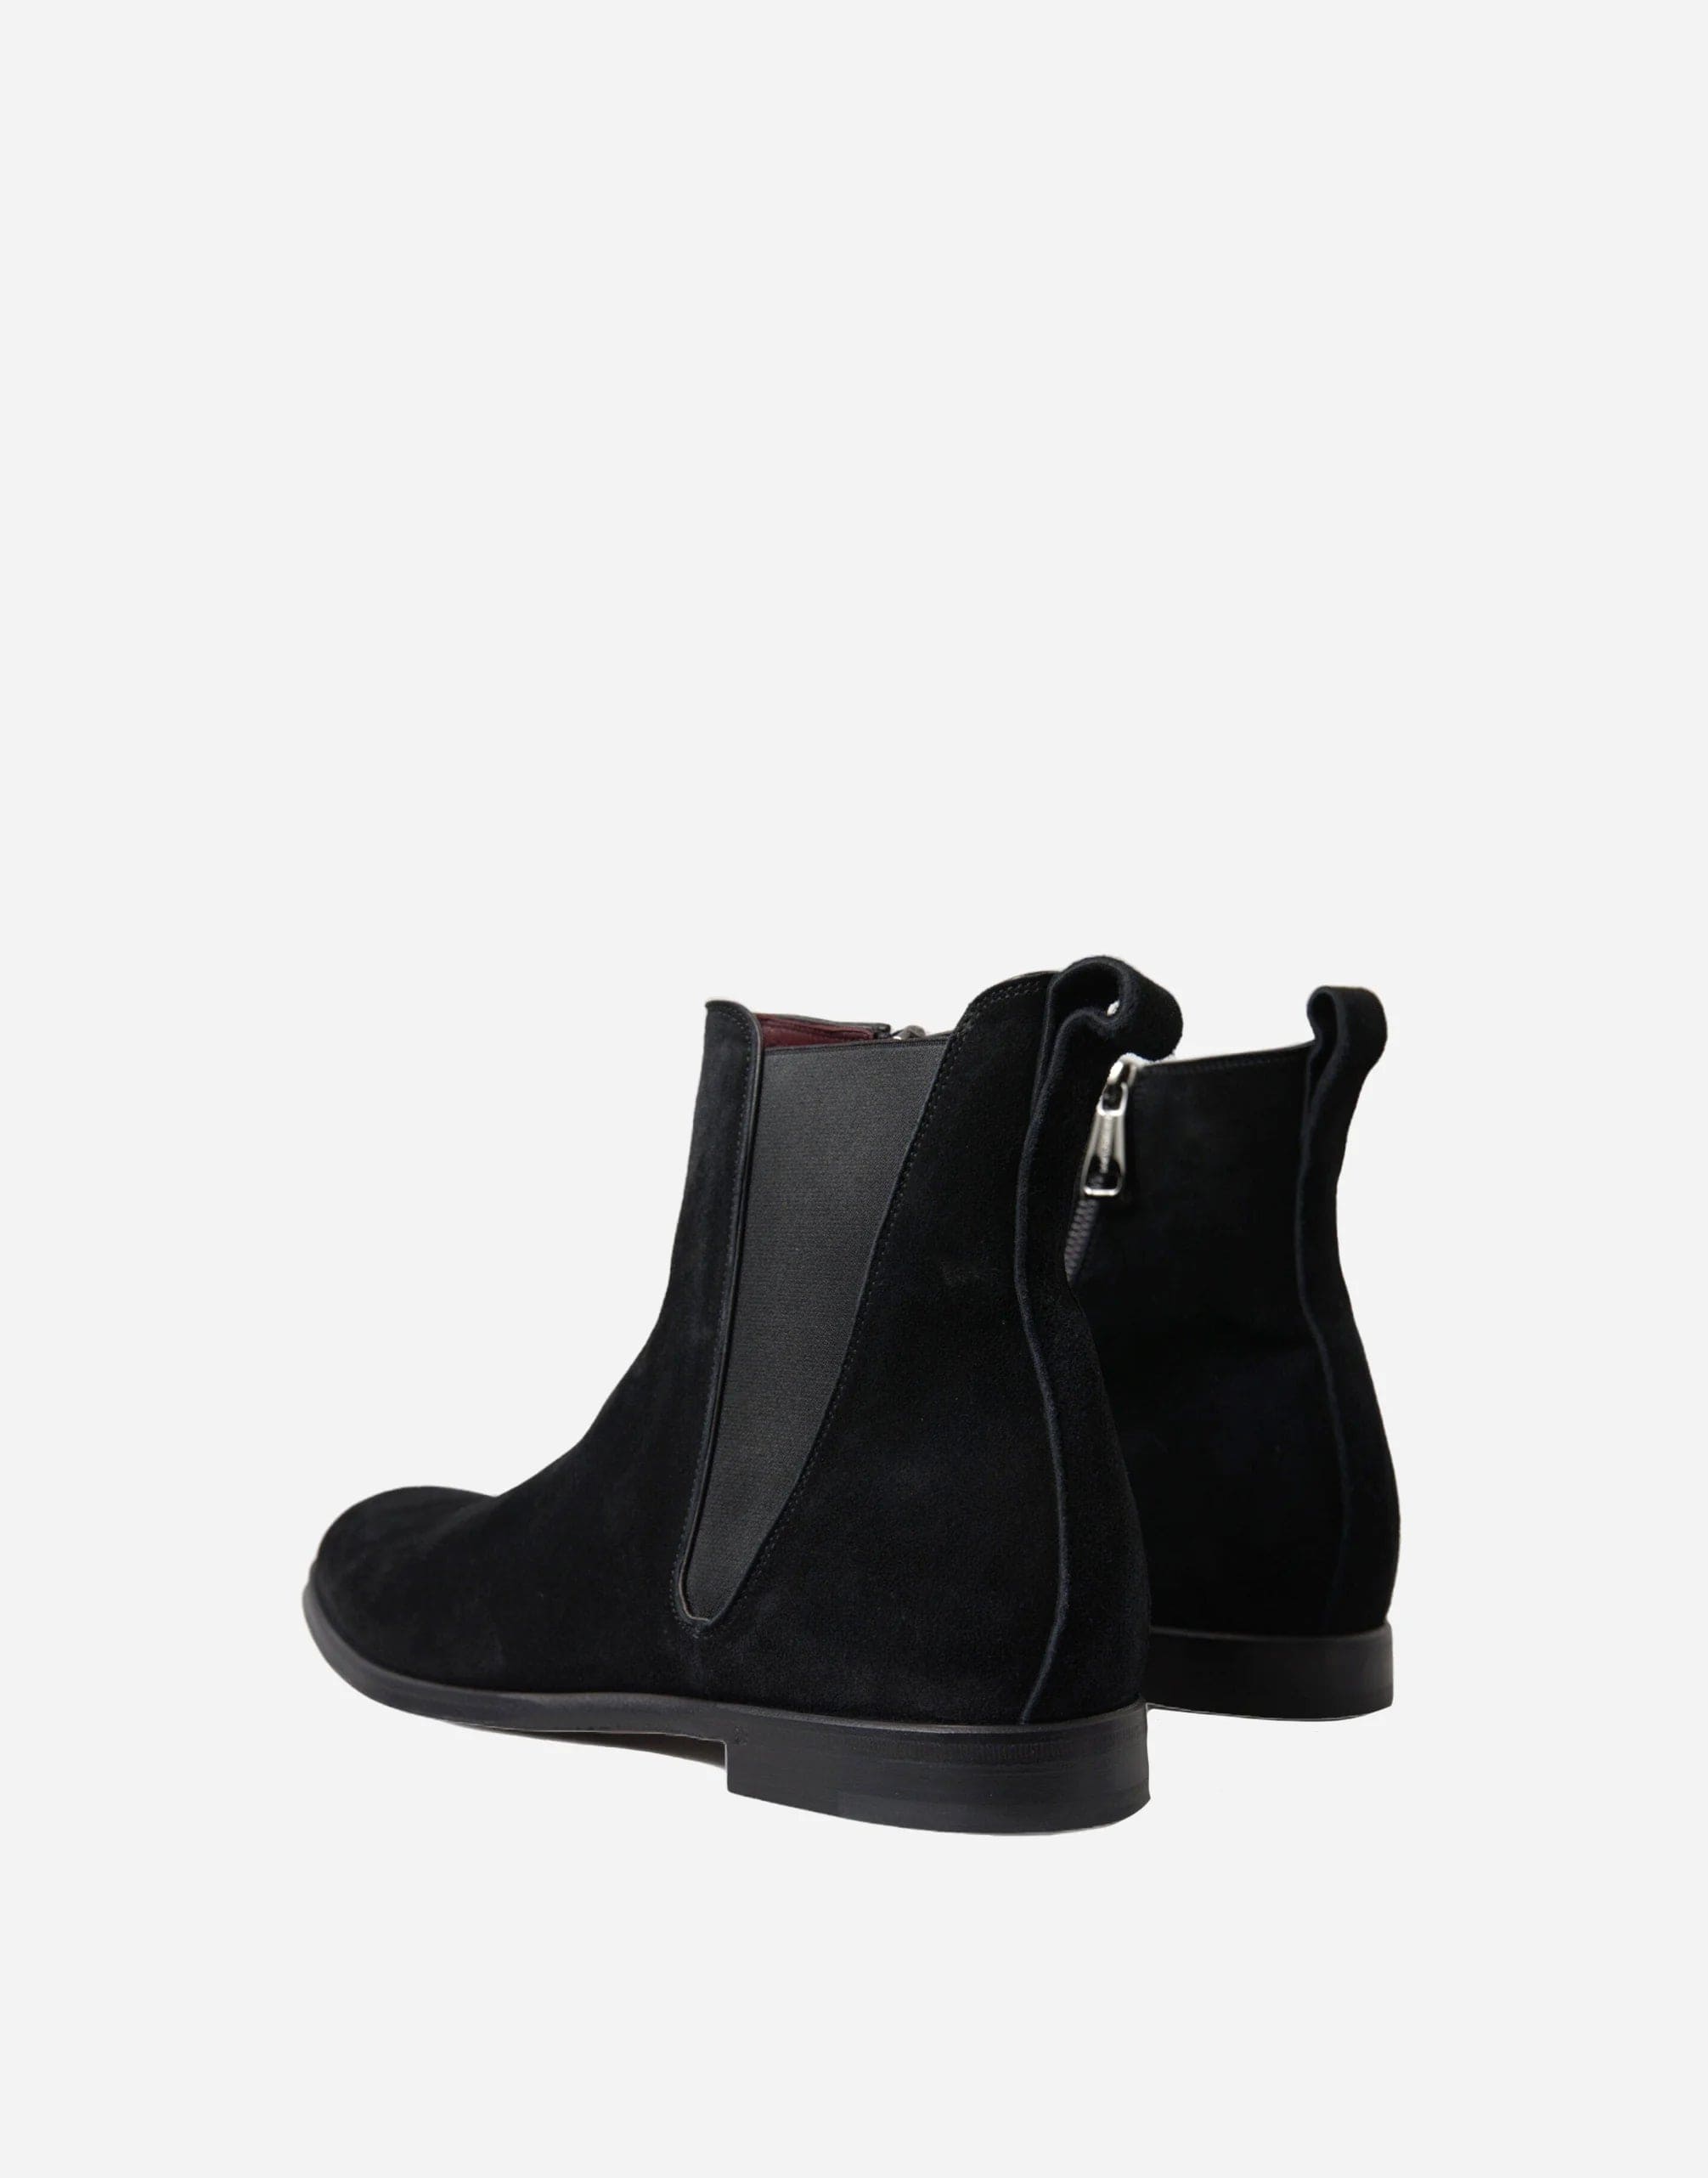 Dolce & Gabbana Suede Leather Ankle Boots